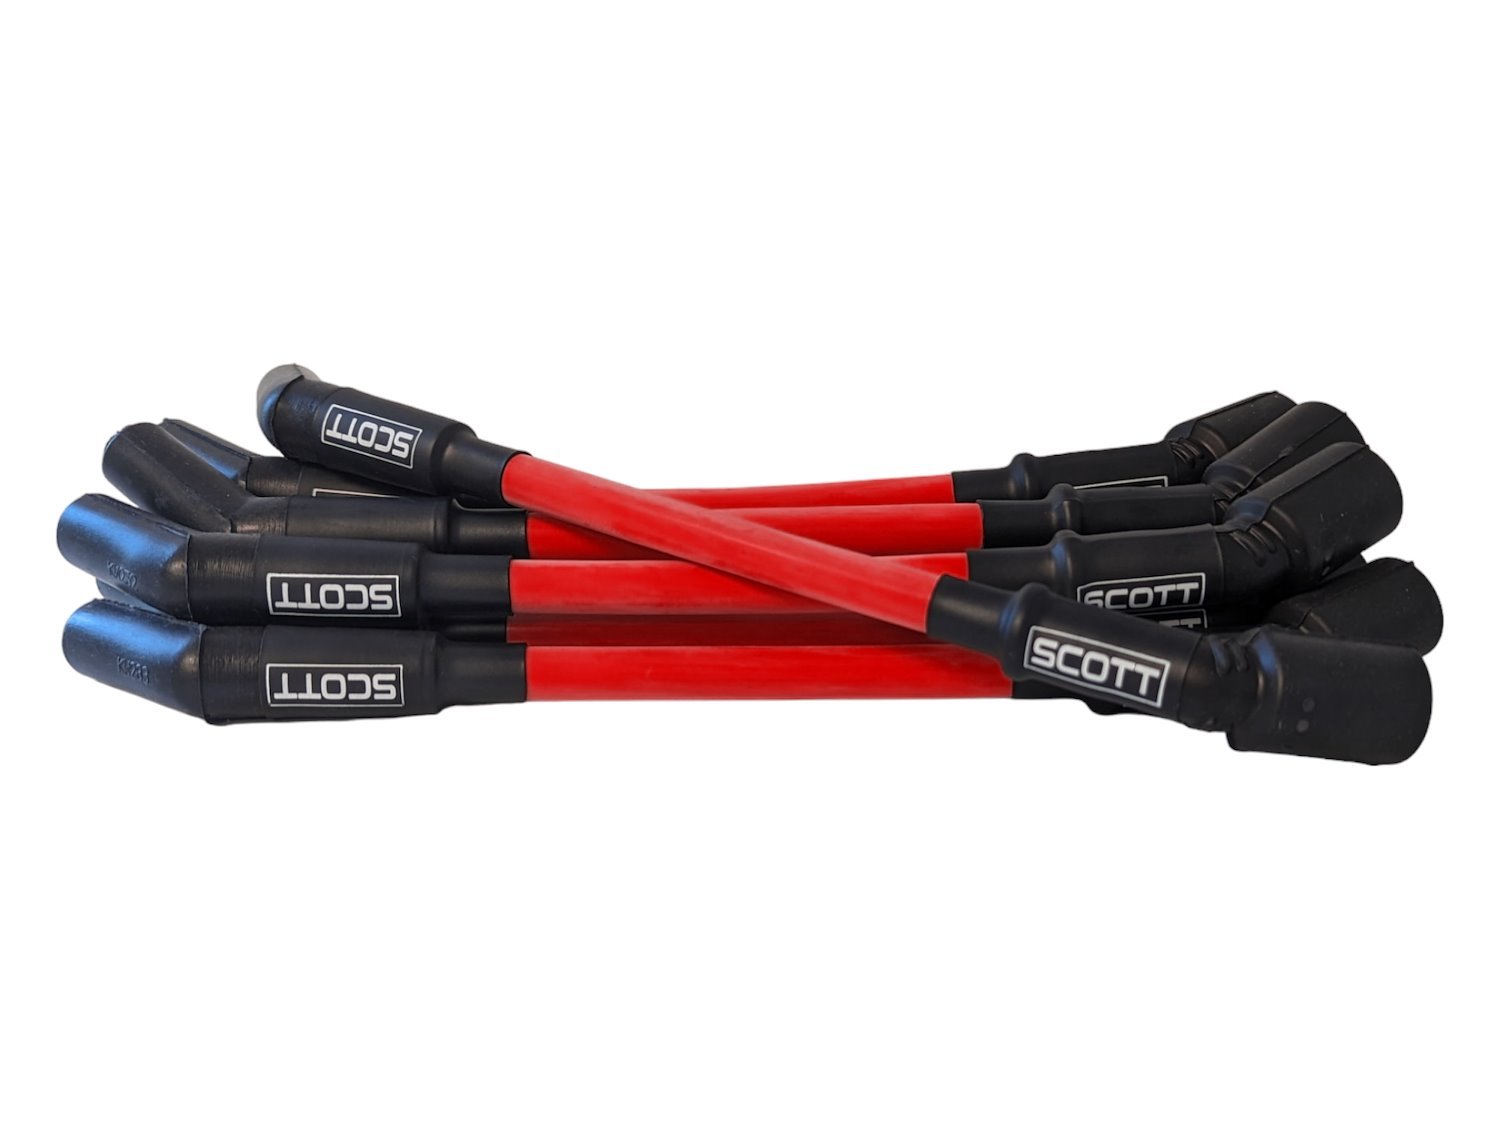 SPW-CH-LT-GEN5-2 High-Performance Silicone-Sleeved Spark Plug Wire Set for GM LS/LT (Gen5), [Red]